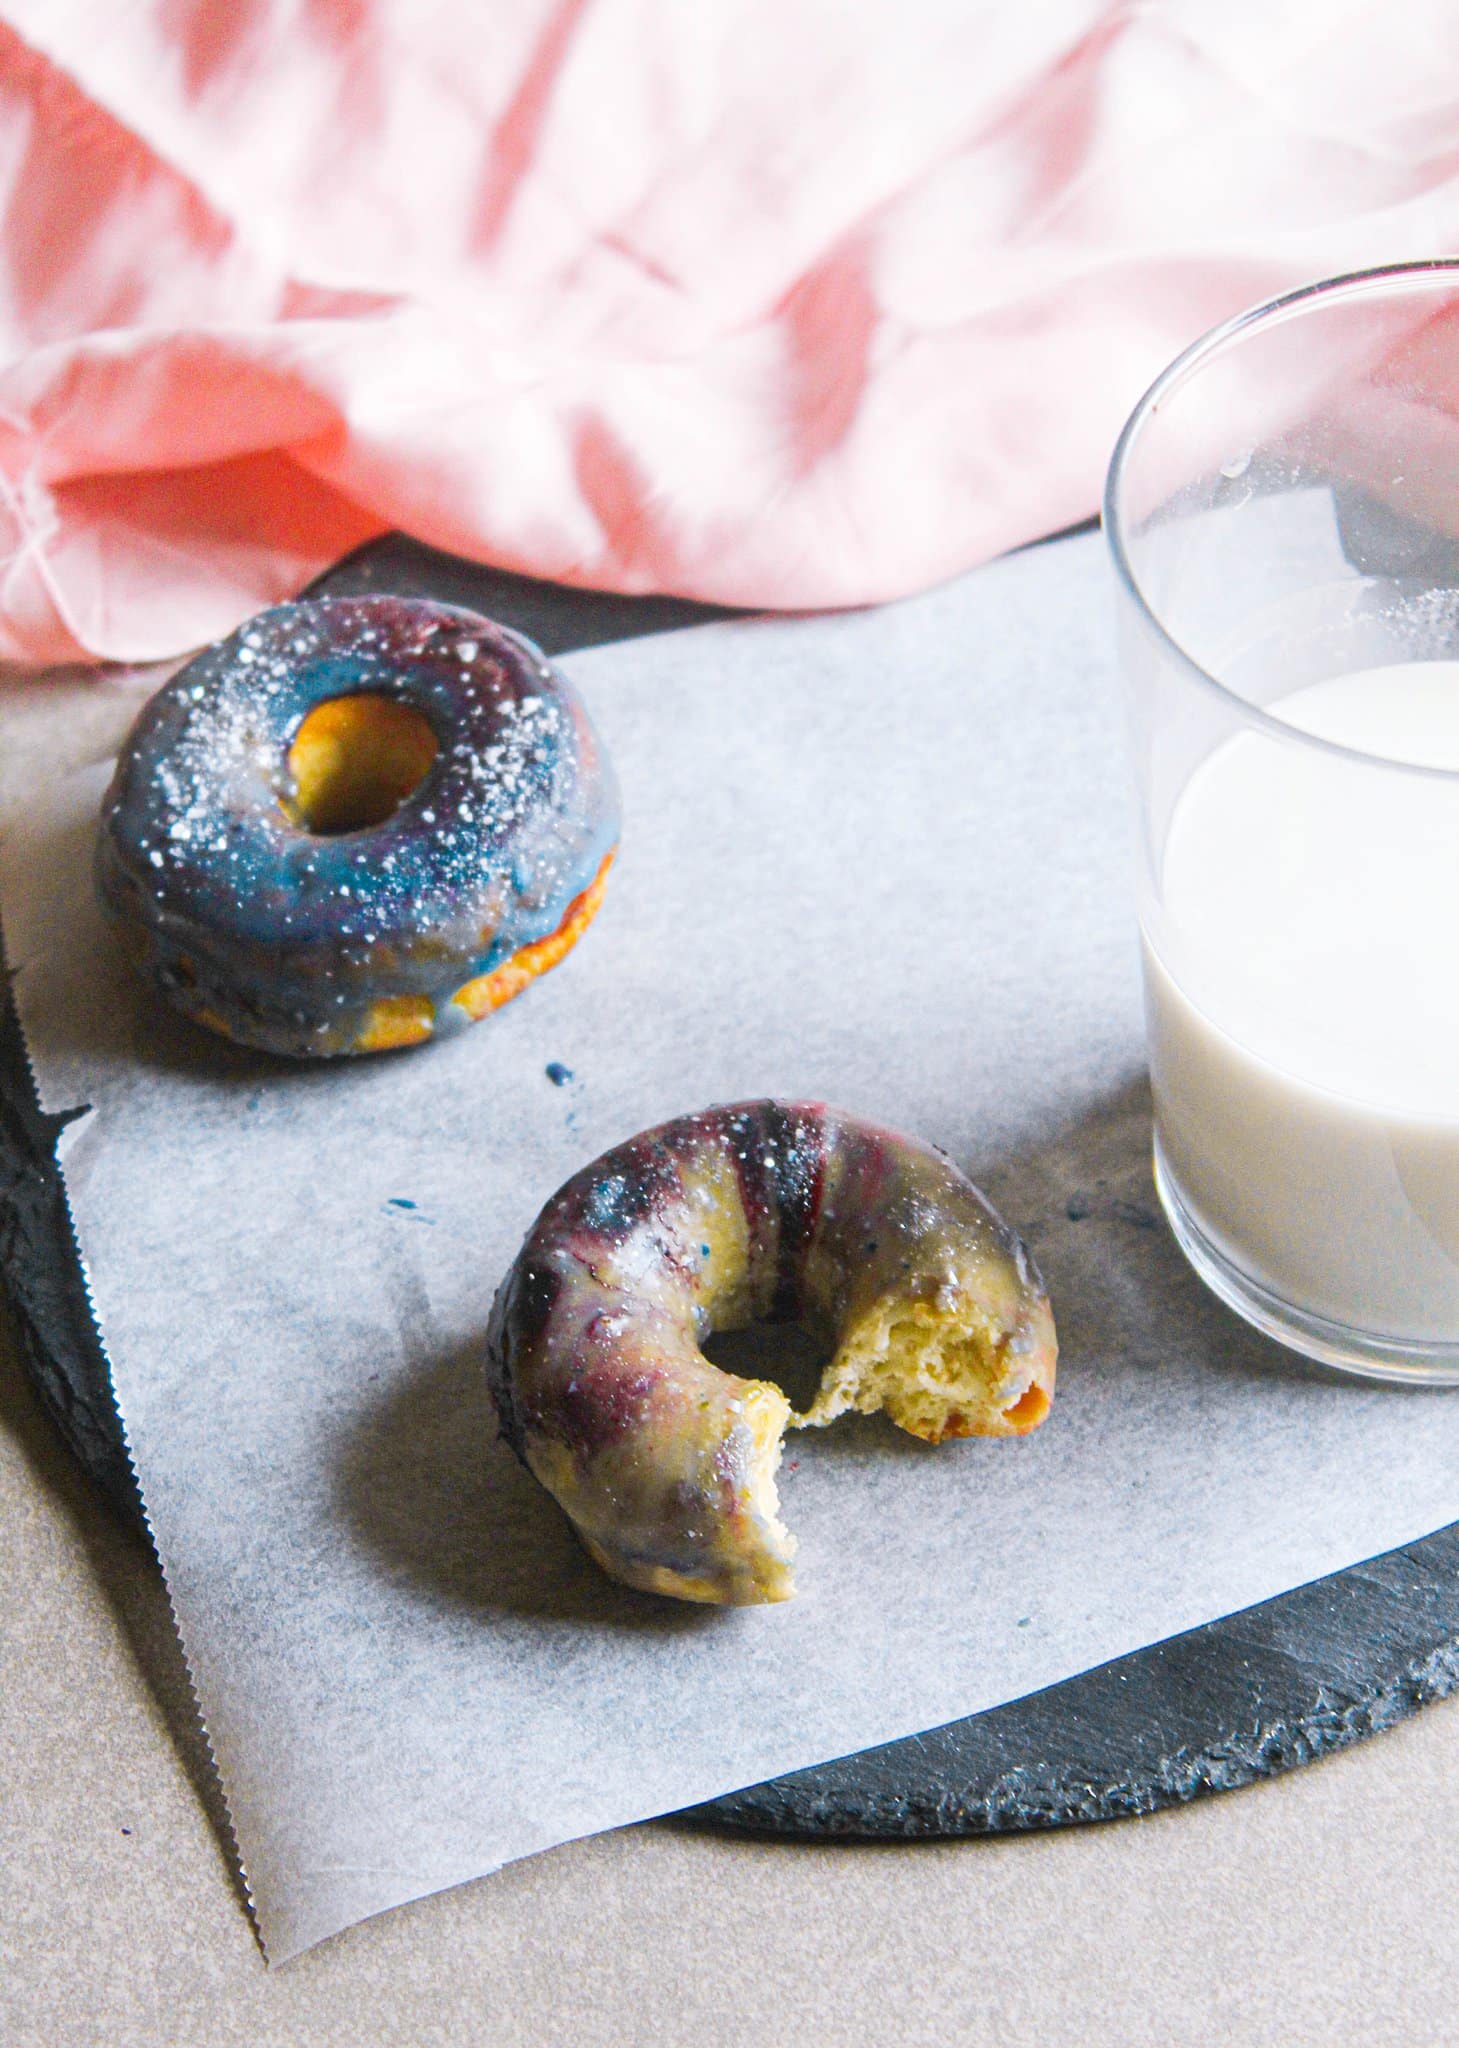 How to Make Galaxy Donuts